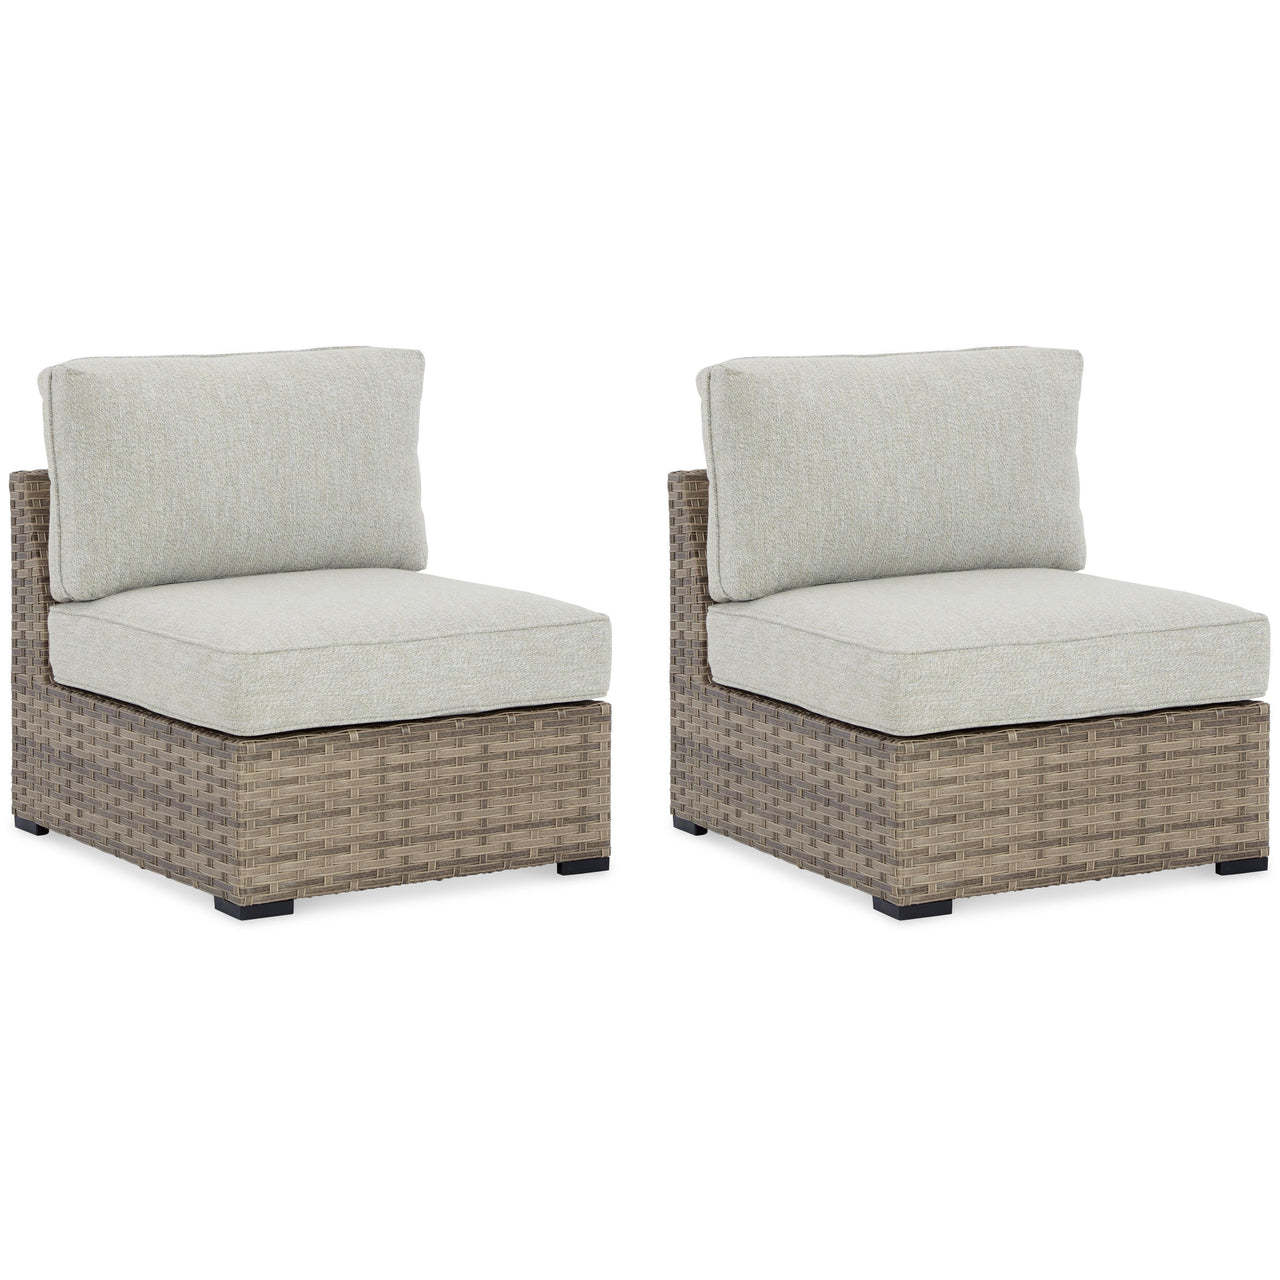 Calworth - Beige - Armless Chair W/Cushion (Set of 2) Tony's Home Furnishings Furniture. Beds. Dressers. Sofas.